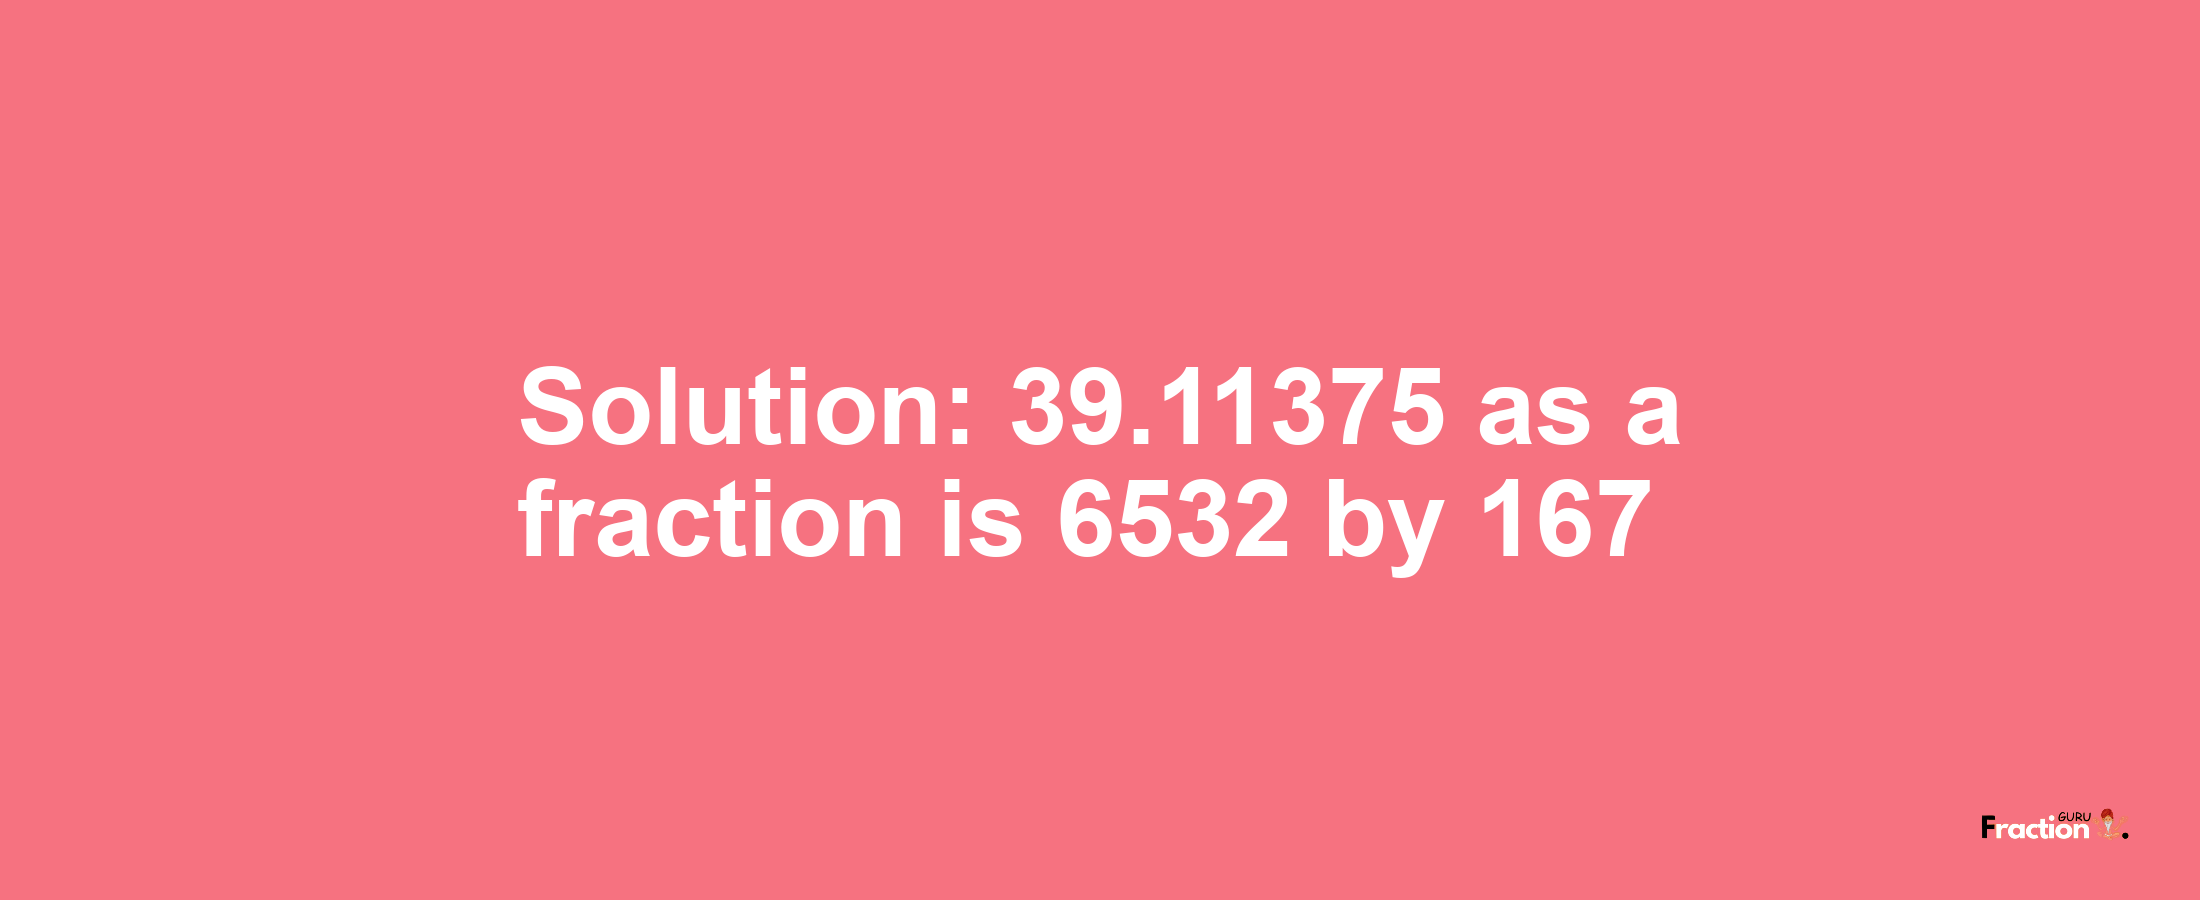 Solution:39.11375 as a fraction is 6532/167